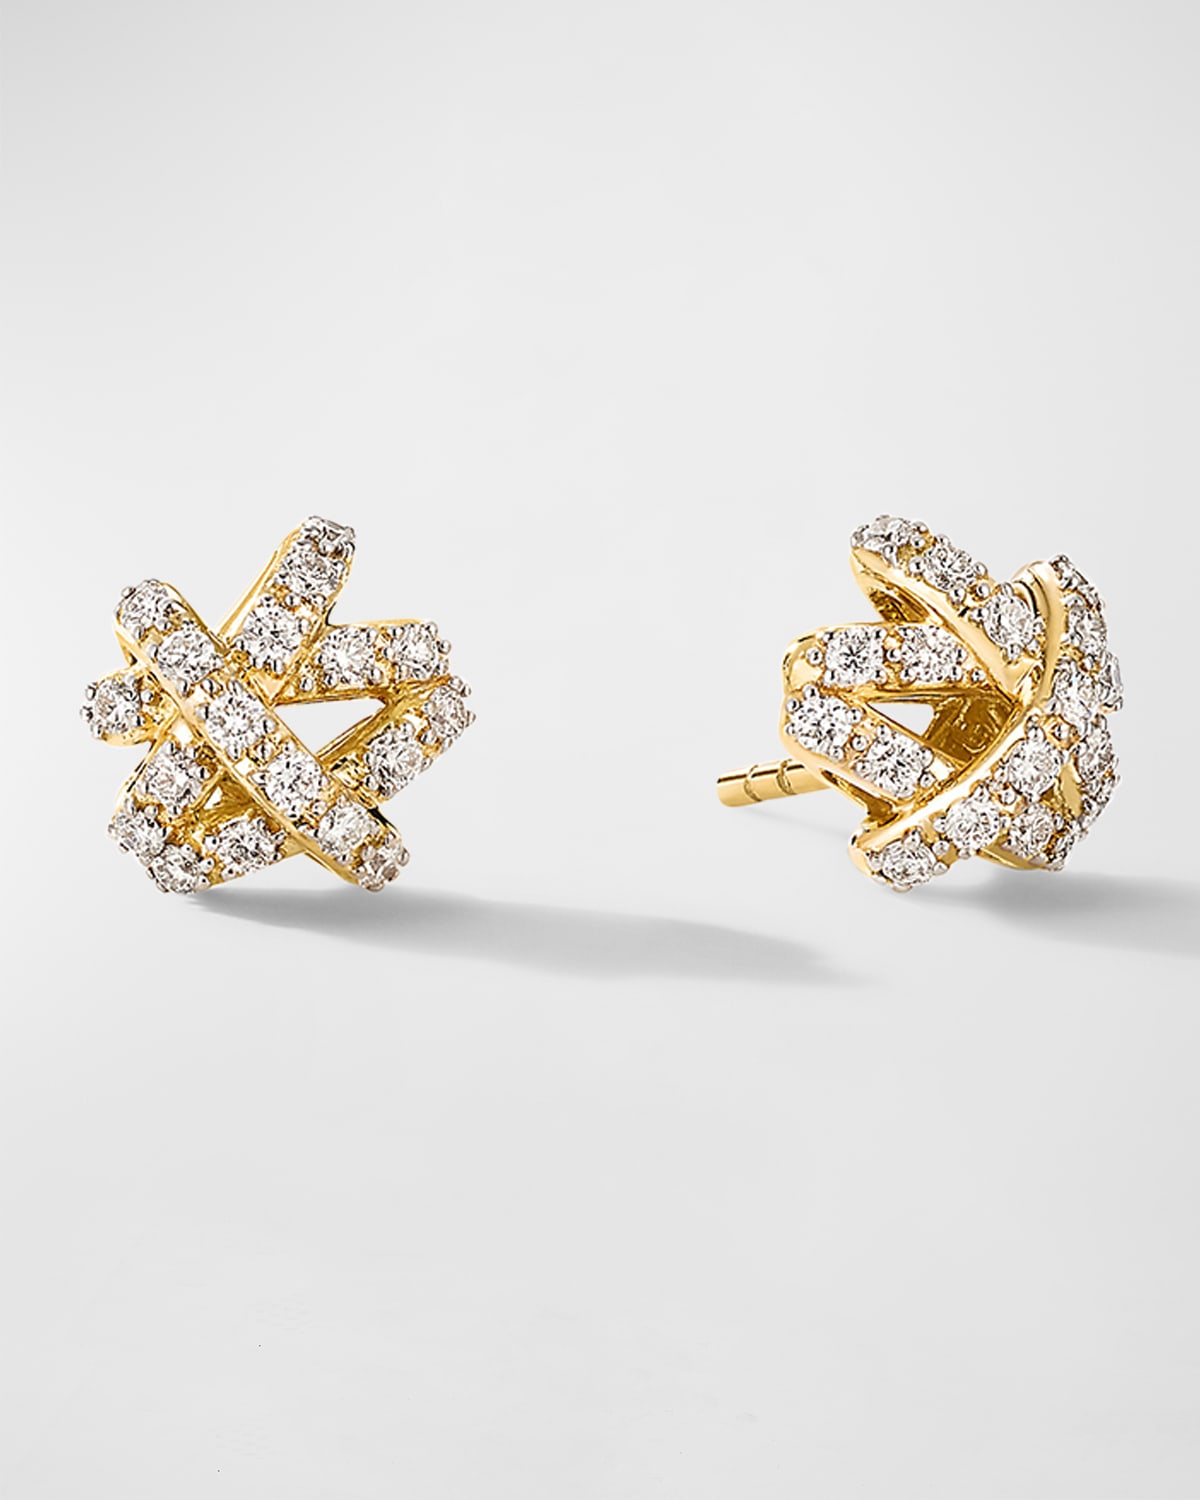 Crossover Stud Earrings with Diamonds in 18K Gold, 9mm